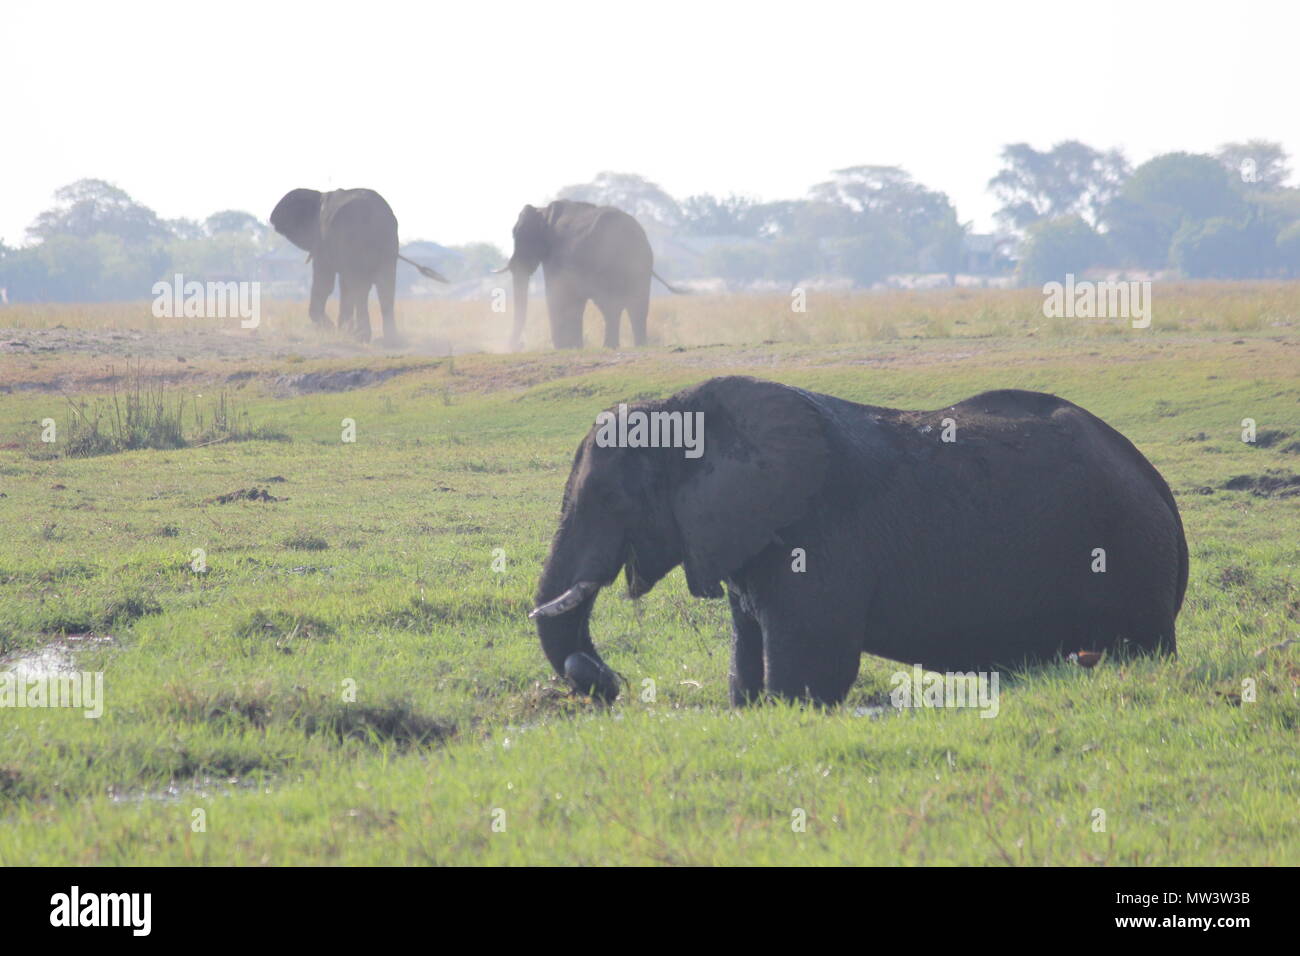 Elephants in the grass Stock Photo